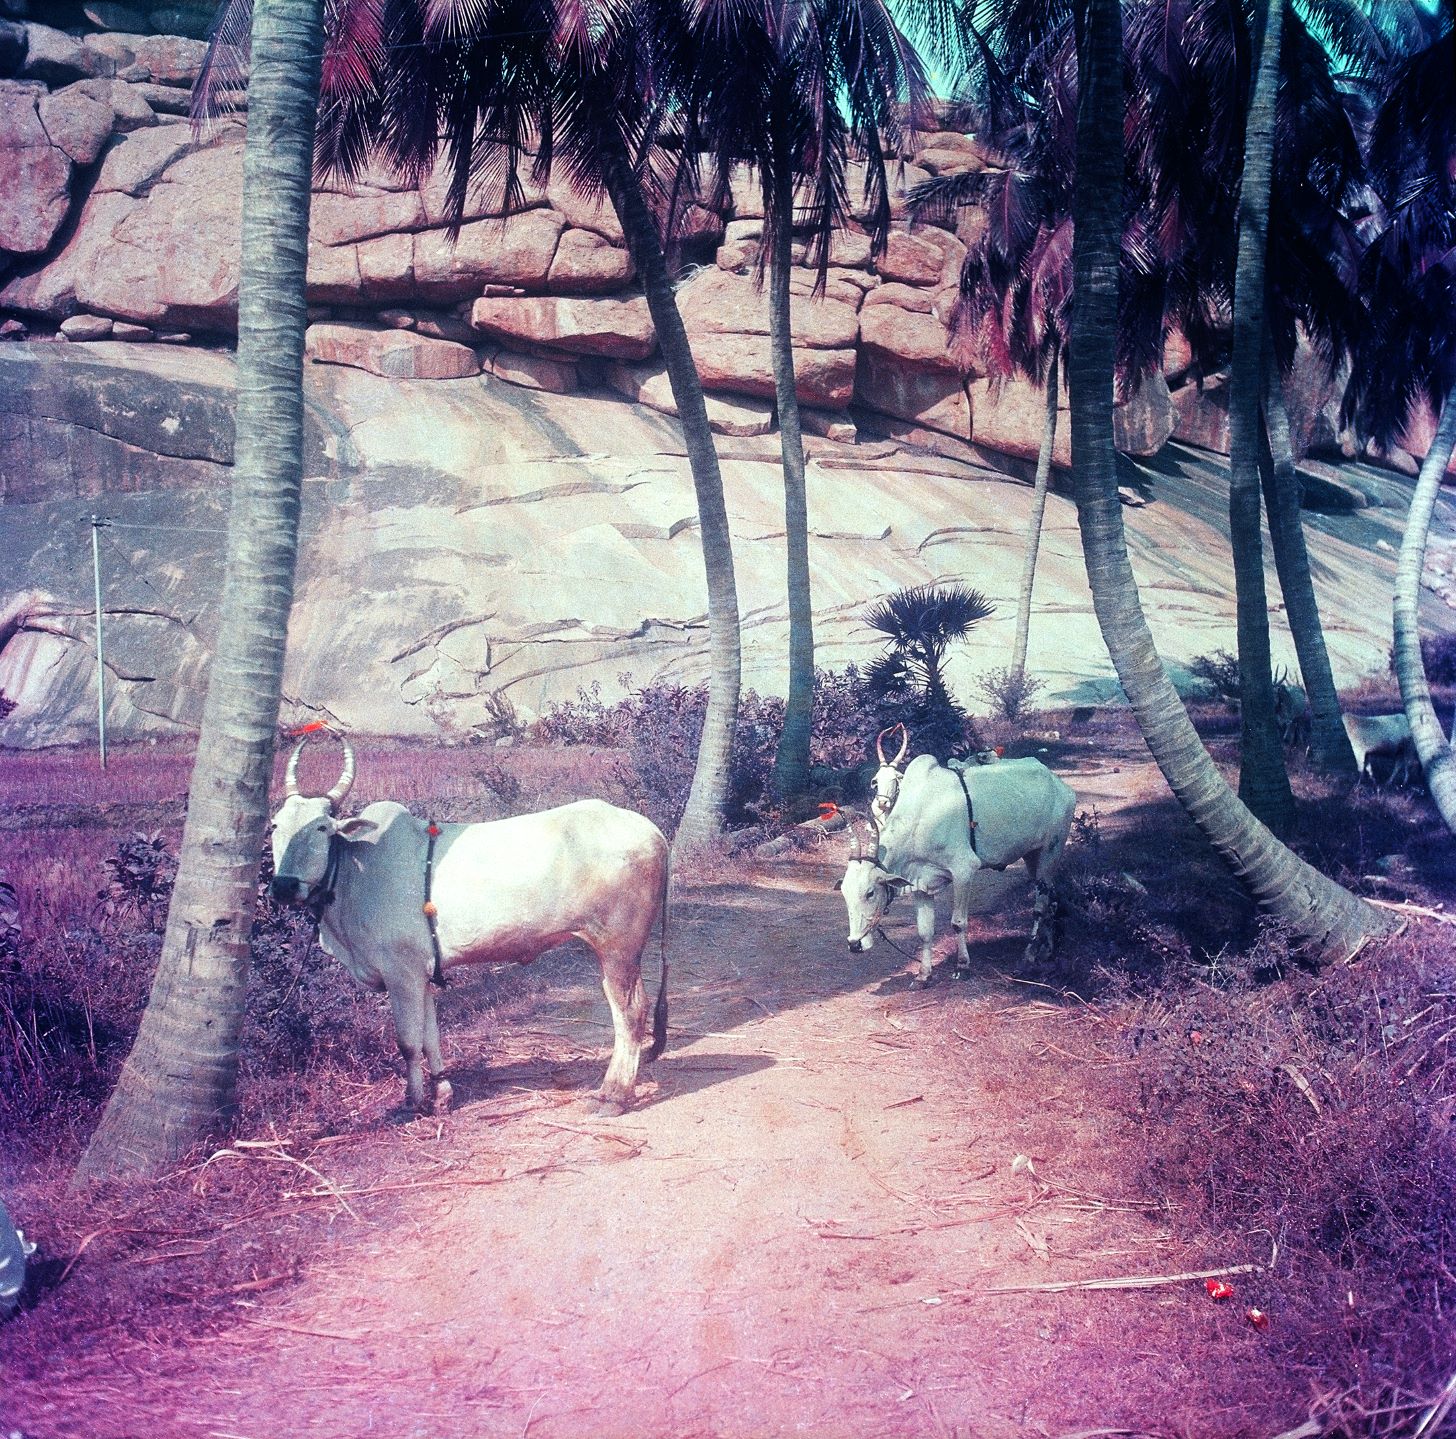 Sacred cows on a dirt path in Inda